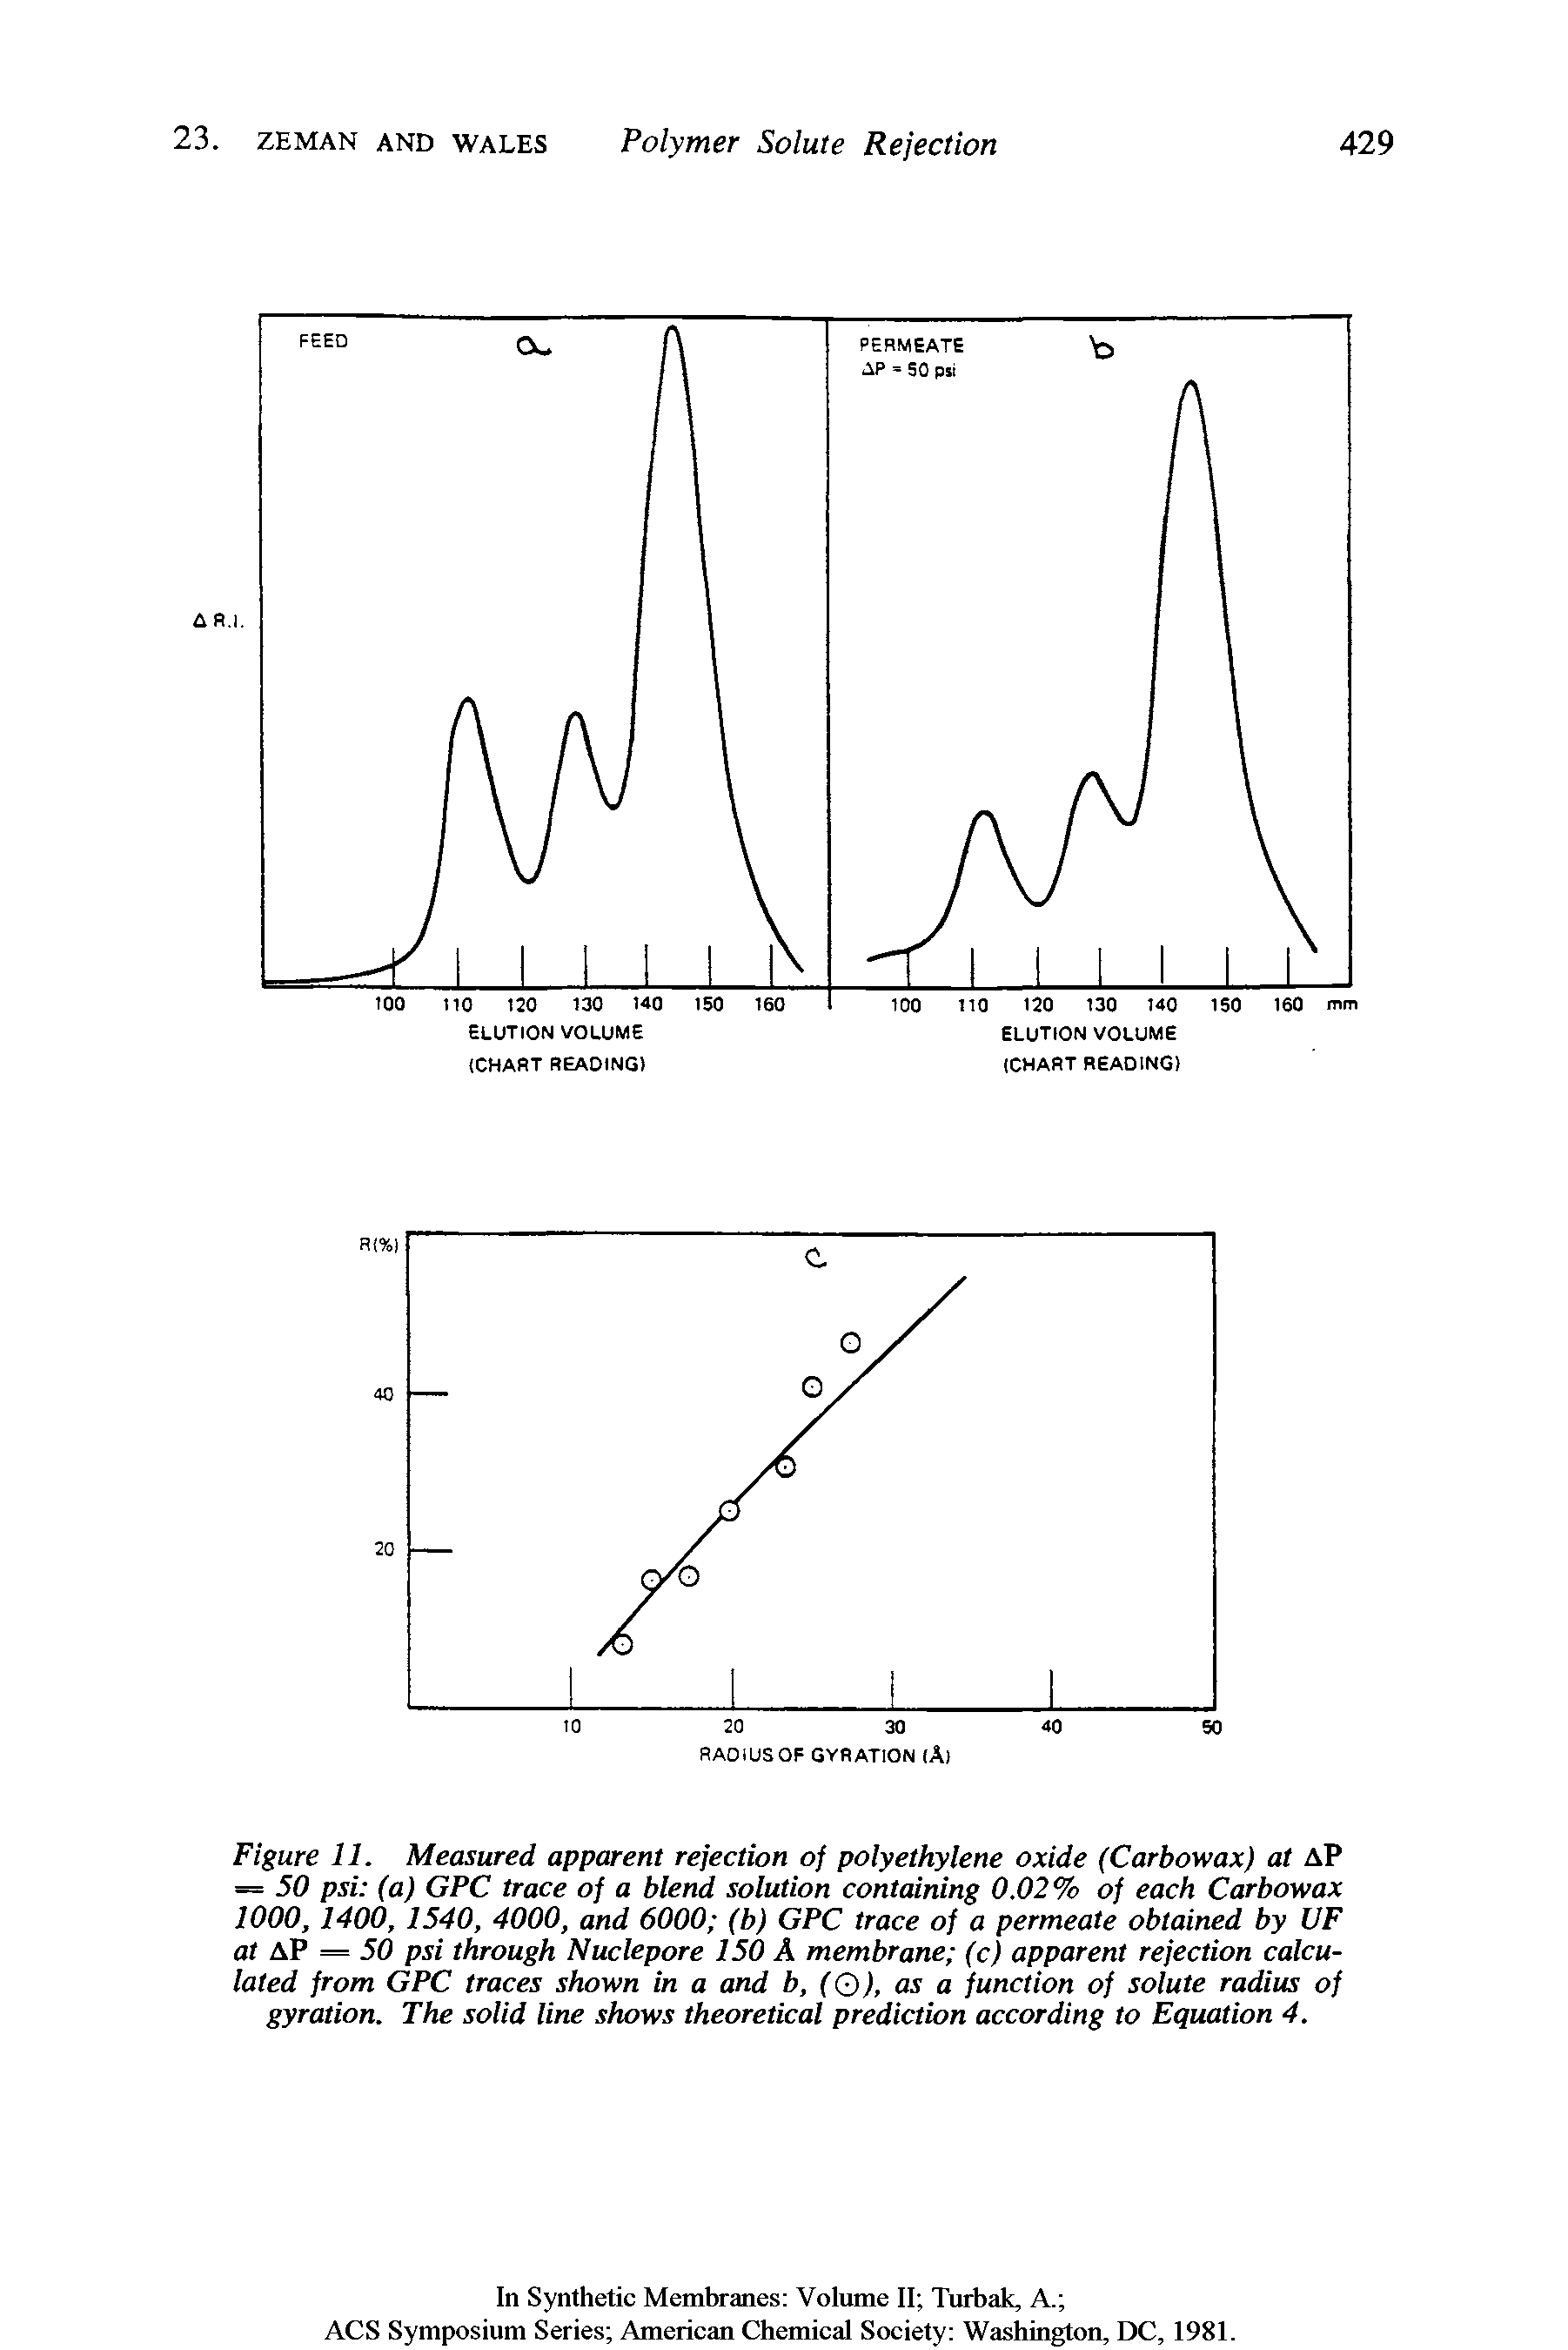 Figure 11. Measured apparent rejection of polyethylene oxide (Carbowax) at aP -= 50 psi (a) GPC trace of a blend solution containing 0.02% of each Carbowax 1000,1400,1540, 4000, and 6000 (b) GPC trace of a permeate obtained by UF at AP = 50 psi through Nuclepore 150 A membrane (c) apparent rejection calculated from GPC traces shown in a and b, (Q), as a function of solute radius of gyration. The solid line shows theoretical prediction according to Equation 4.